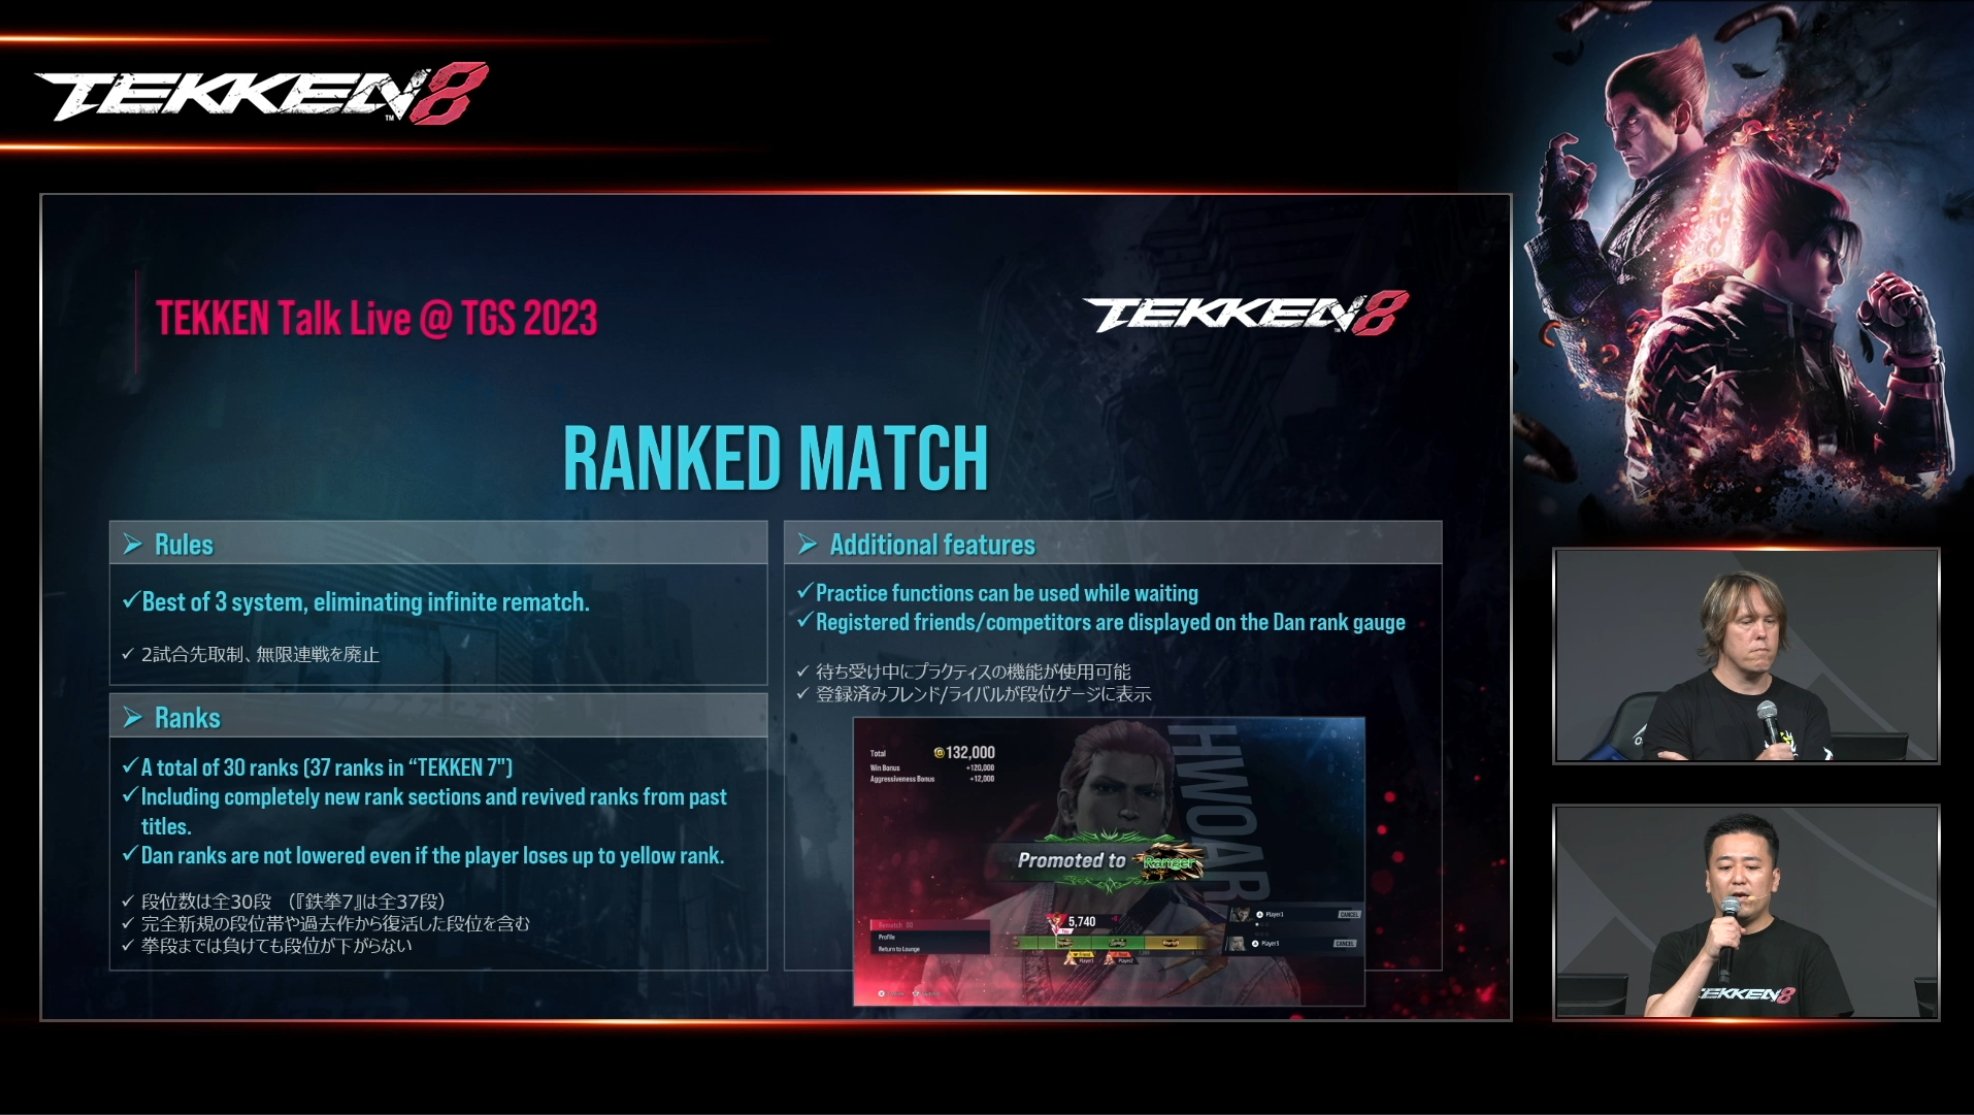 The player will be able to continue practicing while waiting for a ranked match.